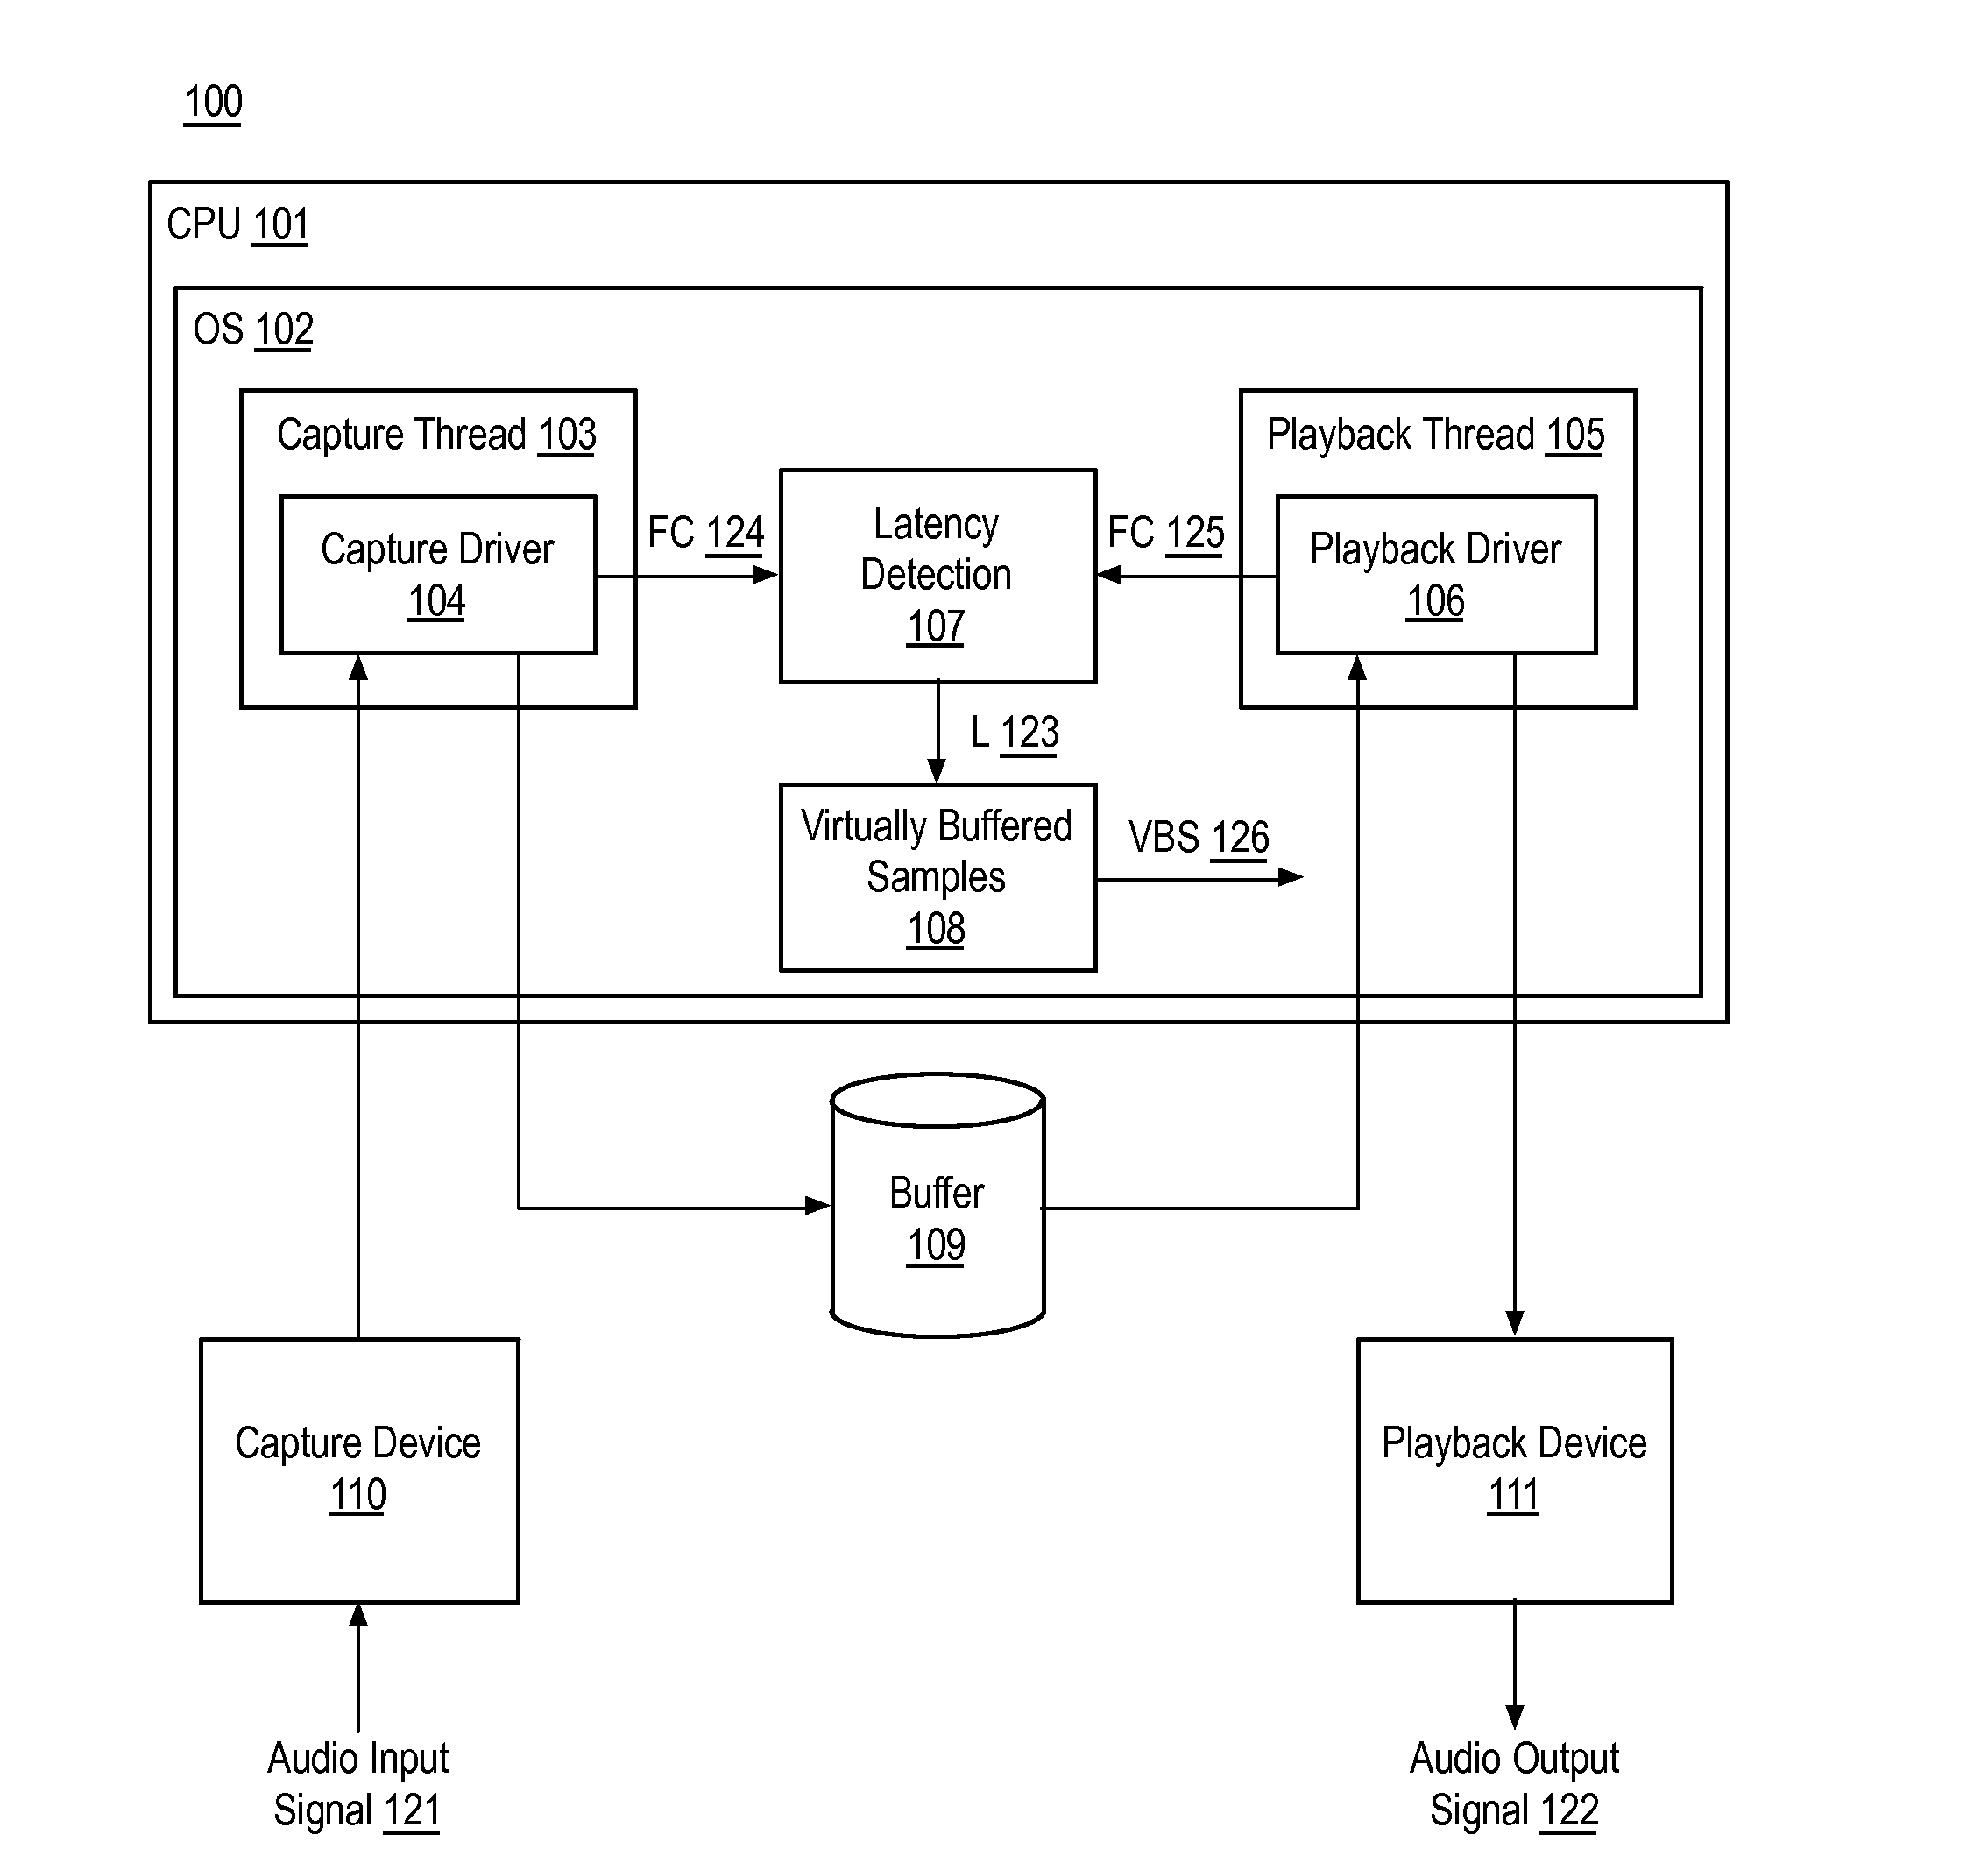 Signal synchronization and latency jitter compensation for audio transmission systems